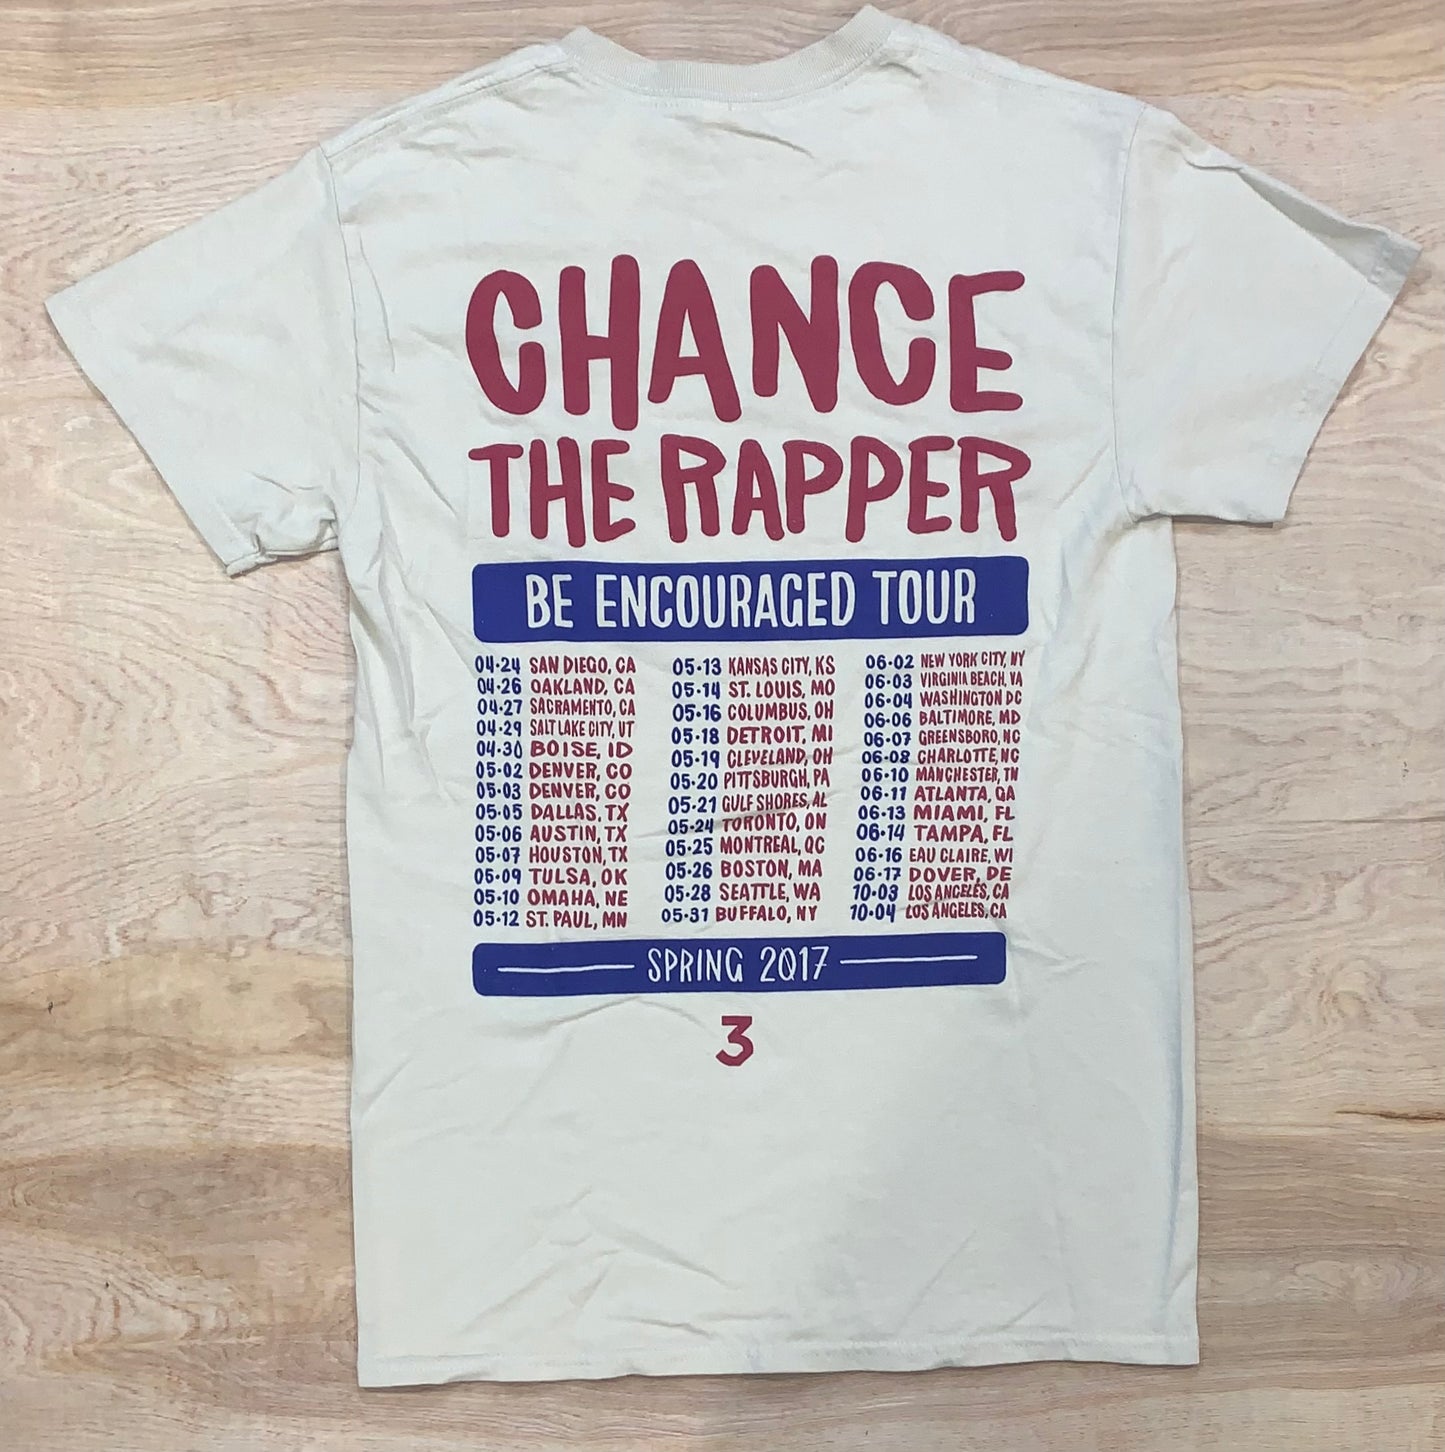 CHANCE THE RAPPER “courage” Concert T-shirt